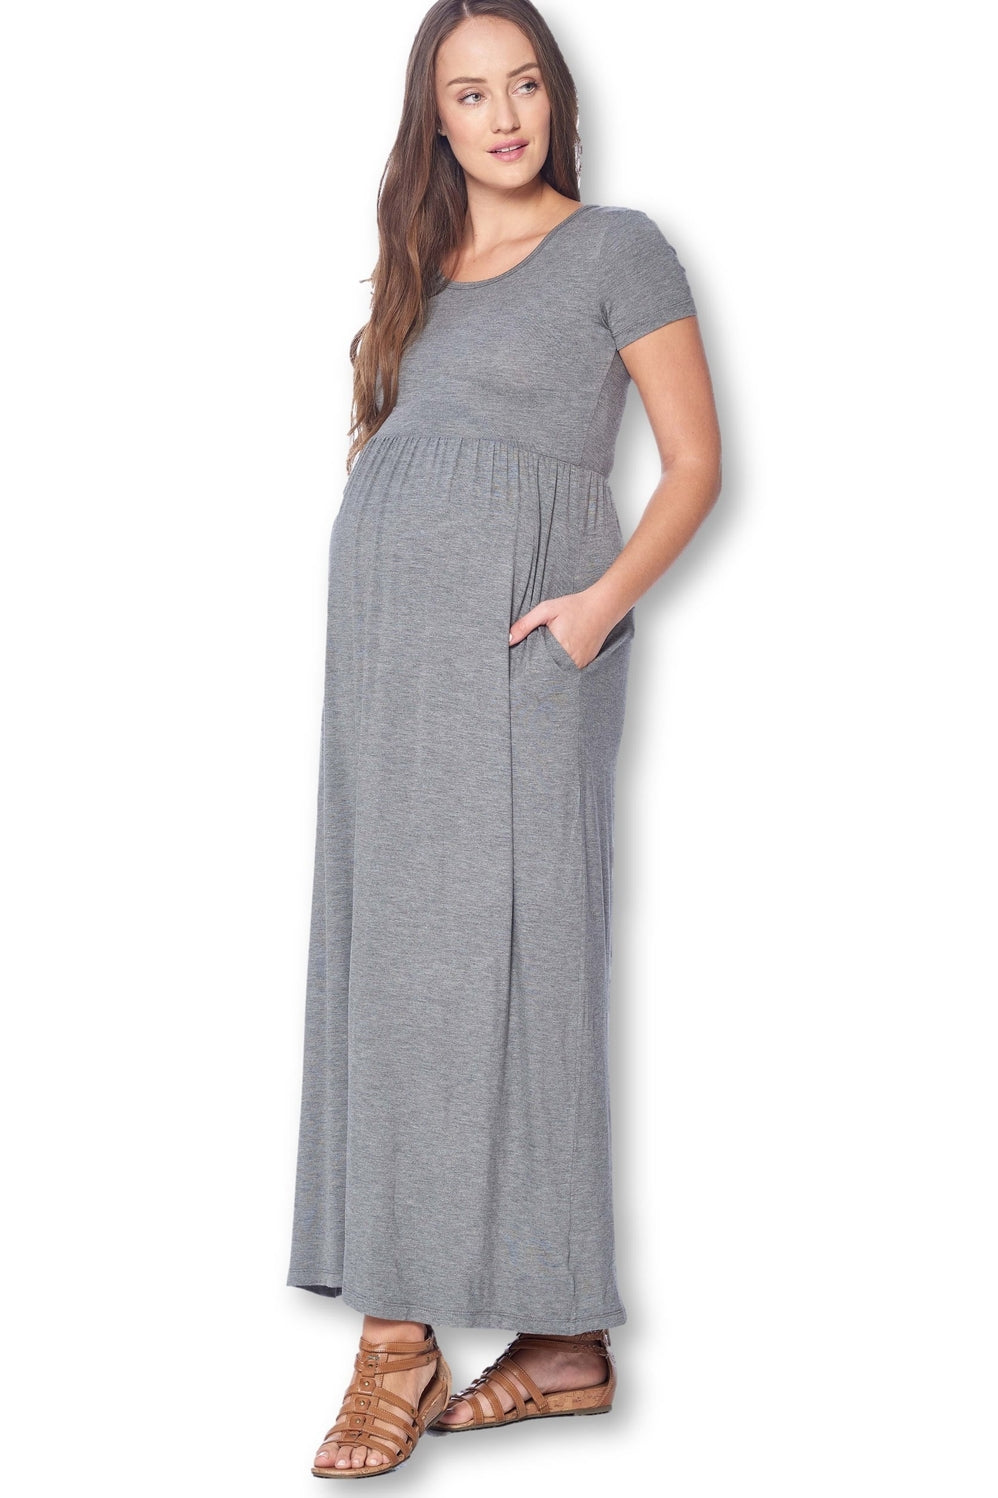 Made in USA - Charcoal Short Sleeve Loose Maternity Dress